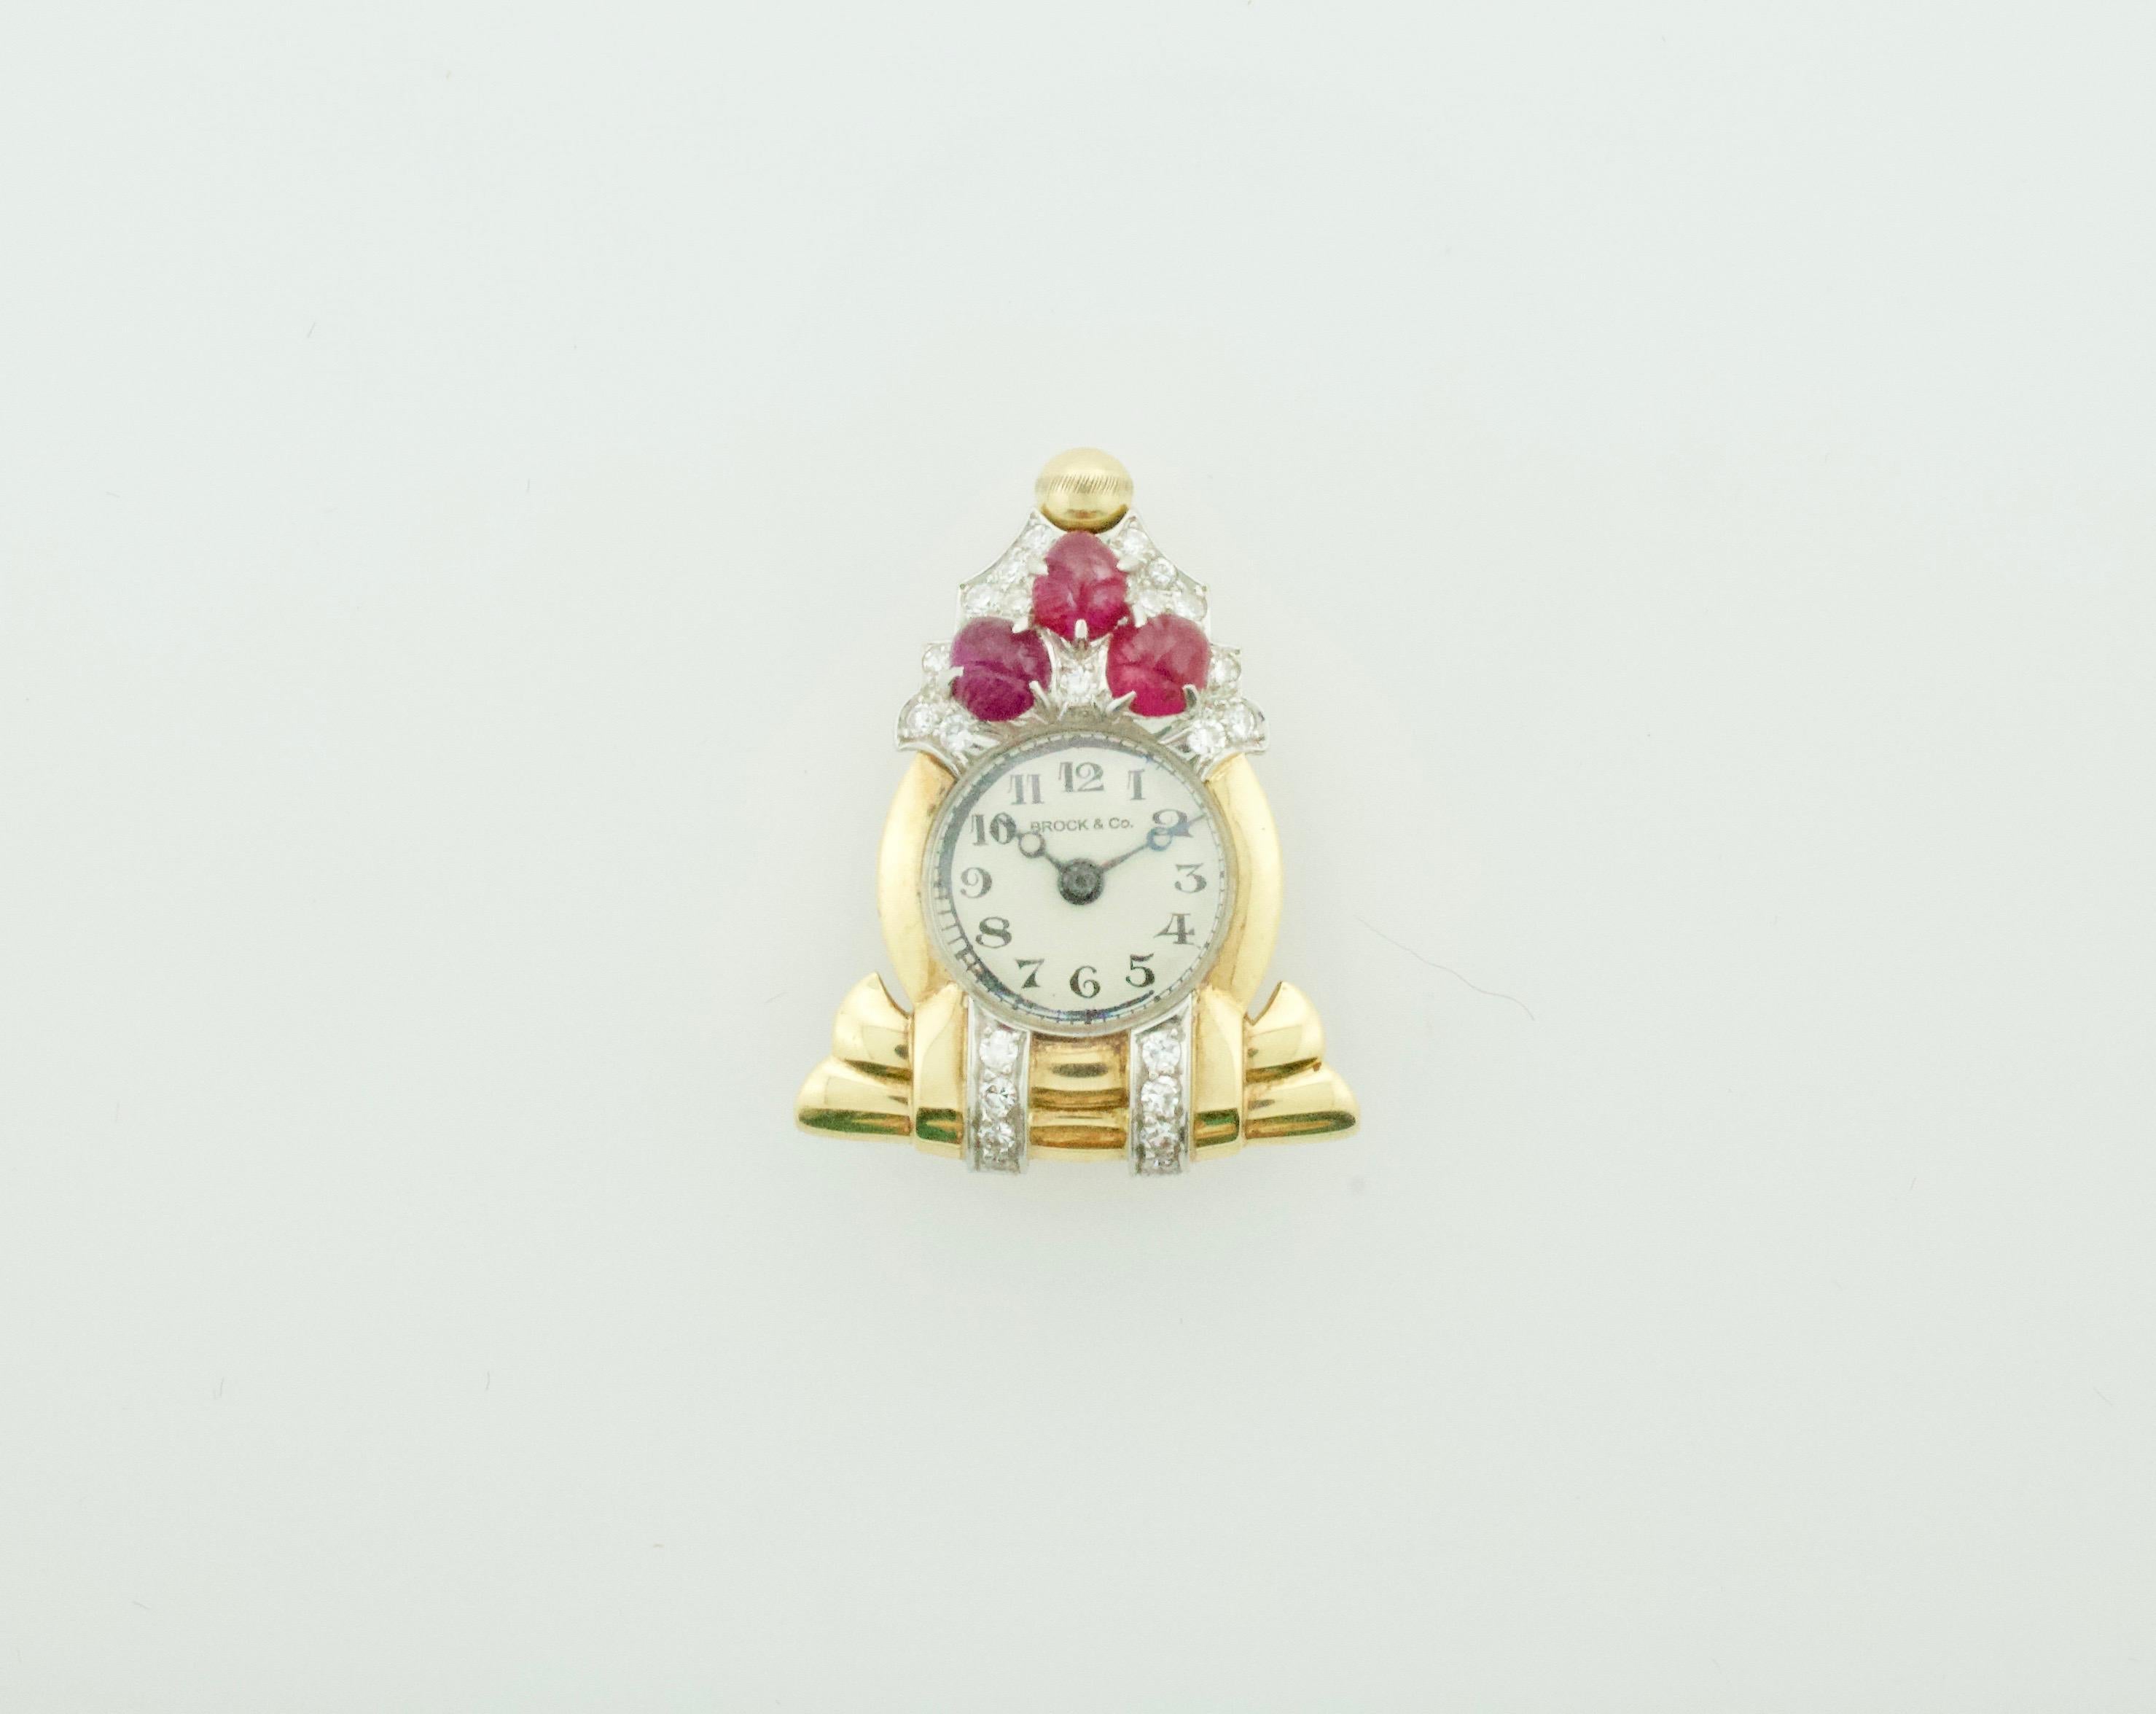 1940's Retro Ruby and Diamond Watch, Bracelet and Brooch Clip
A Truly Remarkable Piece of Jewelry
The Watch Detaches As A Stand Alone Brooch Clip
Three Carve Rubies Weighing .75 Carats Approximately 
Ten Round Brilliant Cut Diamonds Weighing .30